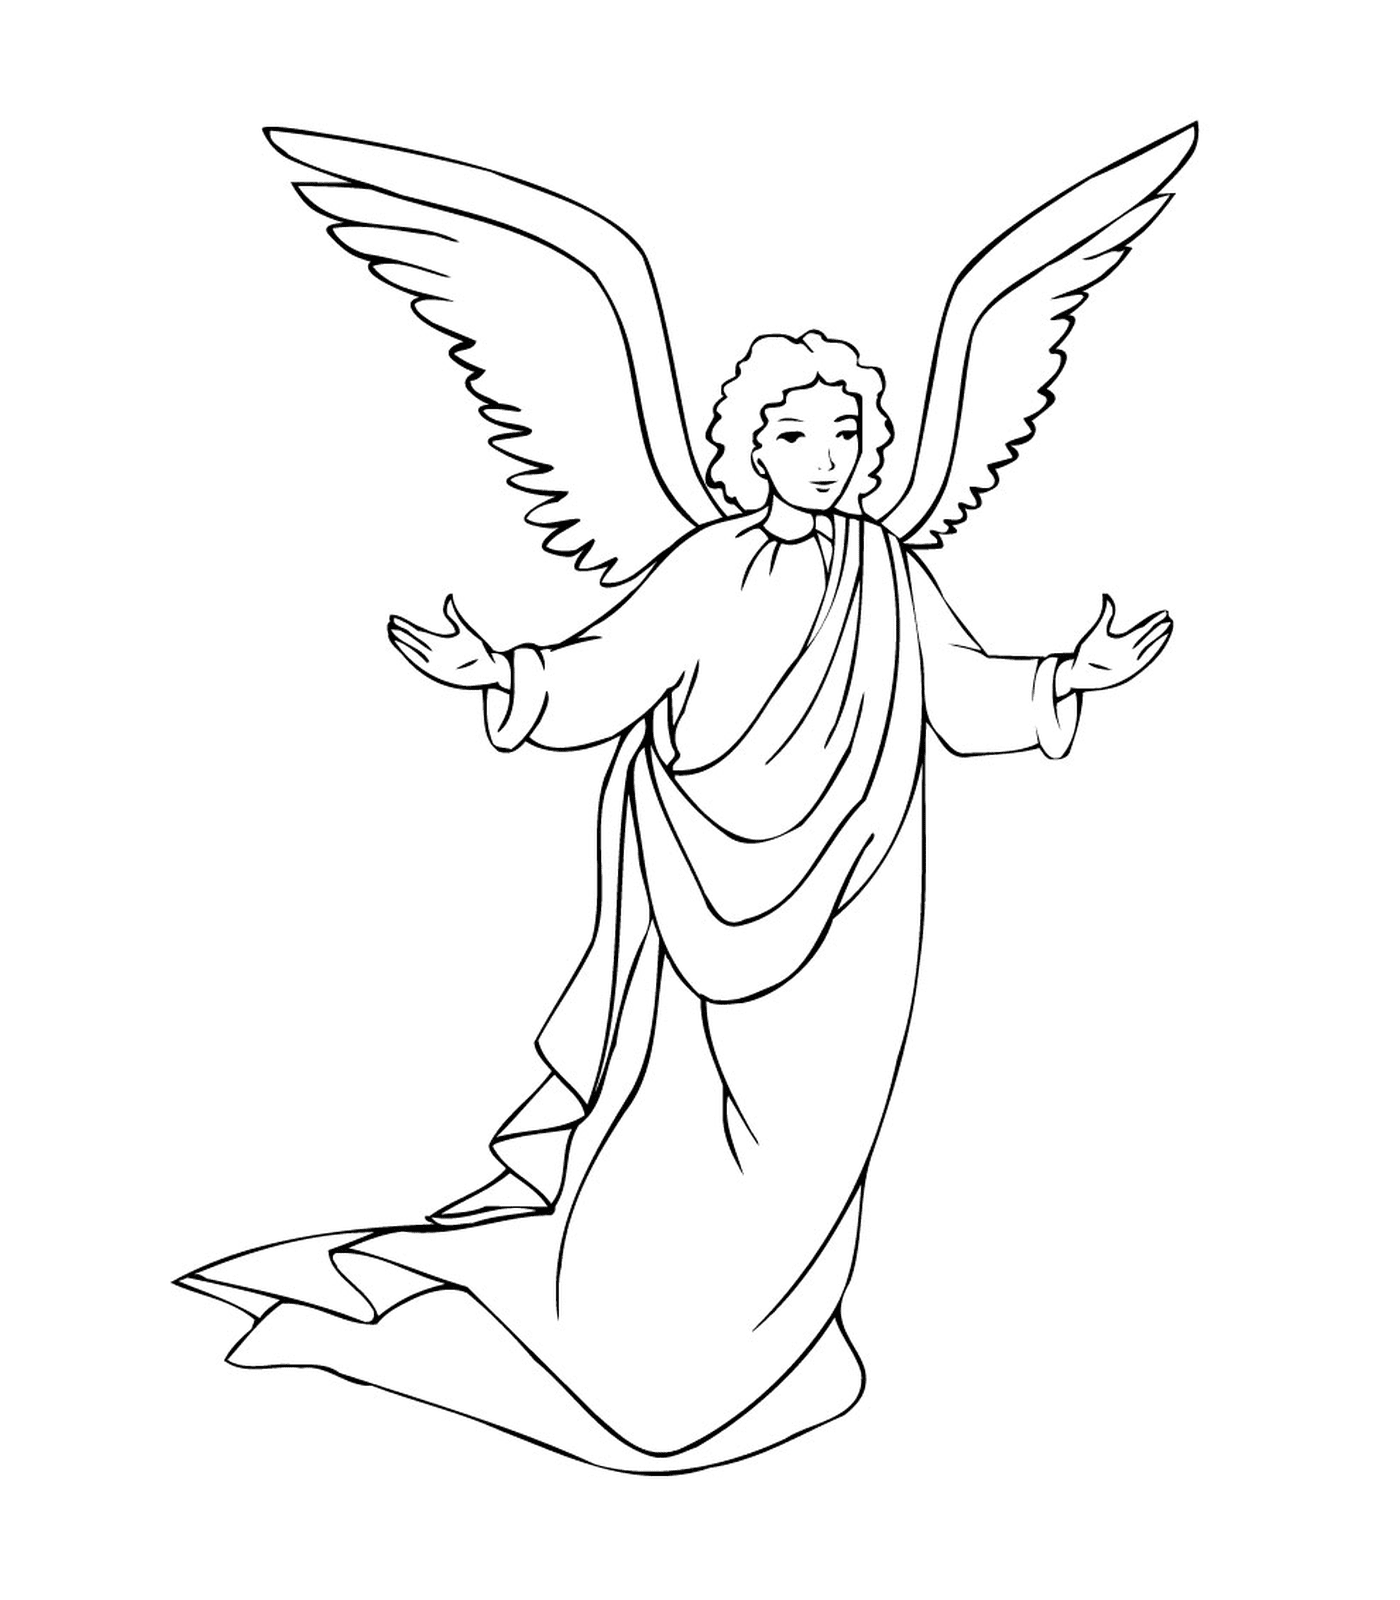  The archangel Gabriel with the wings deployed 